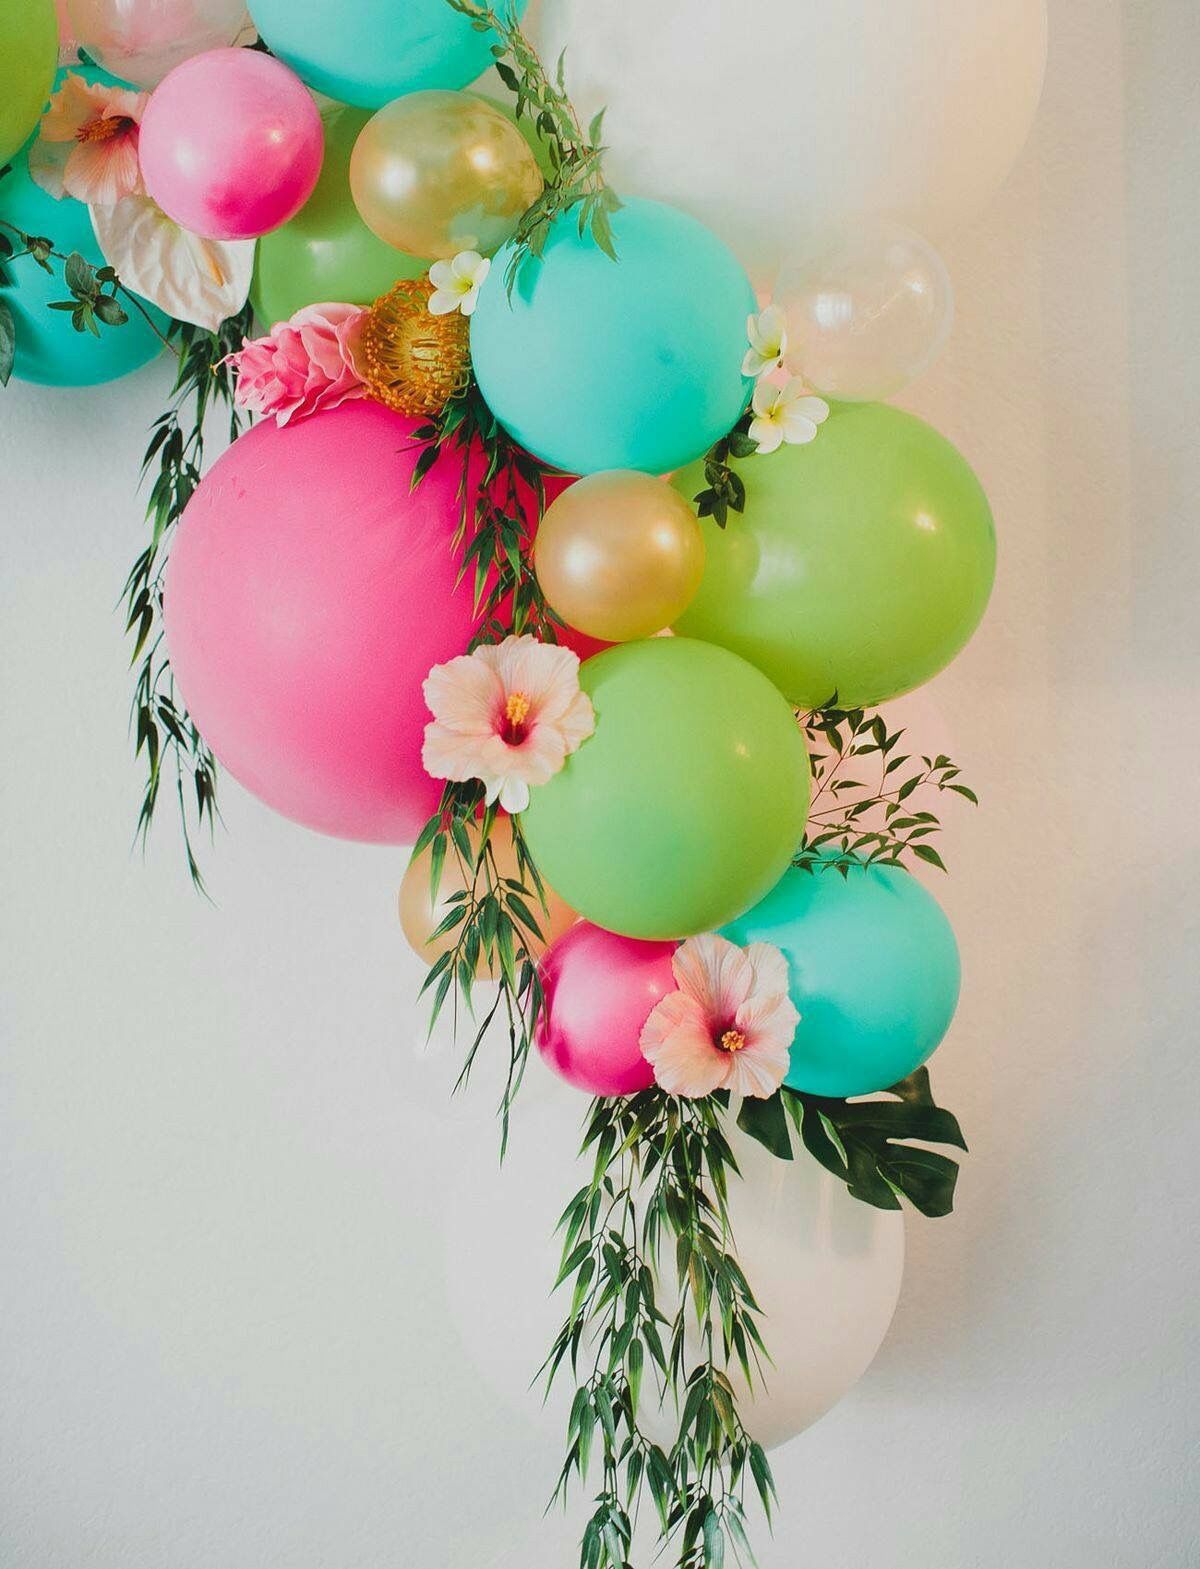 Balloons and flowers party decor